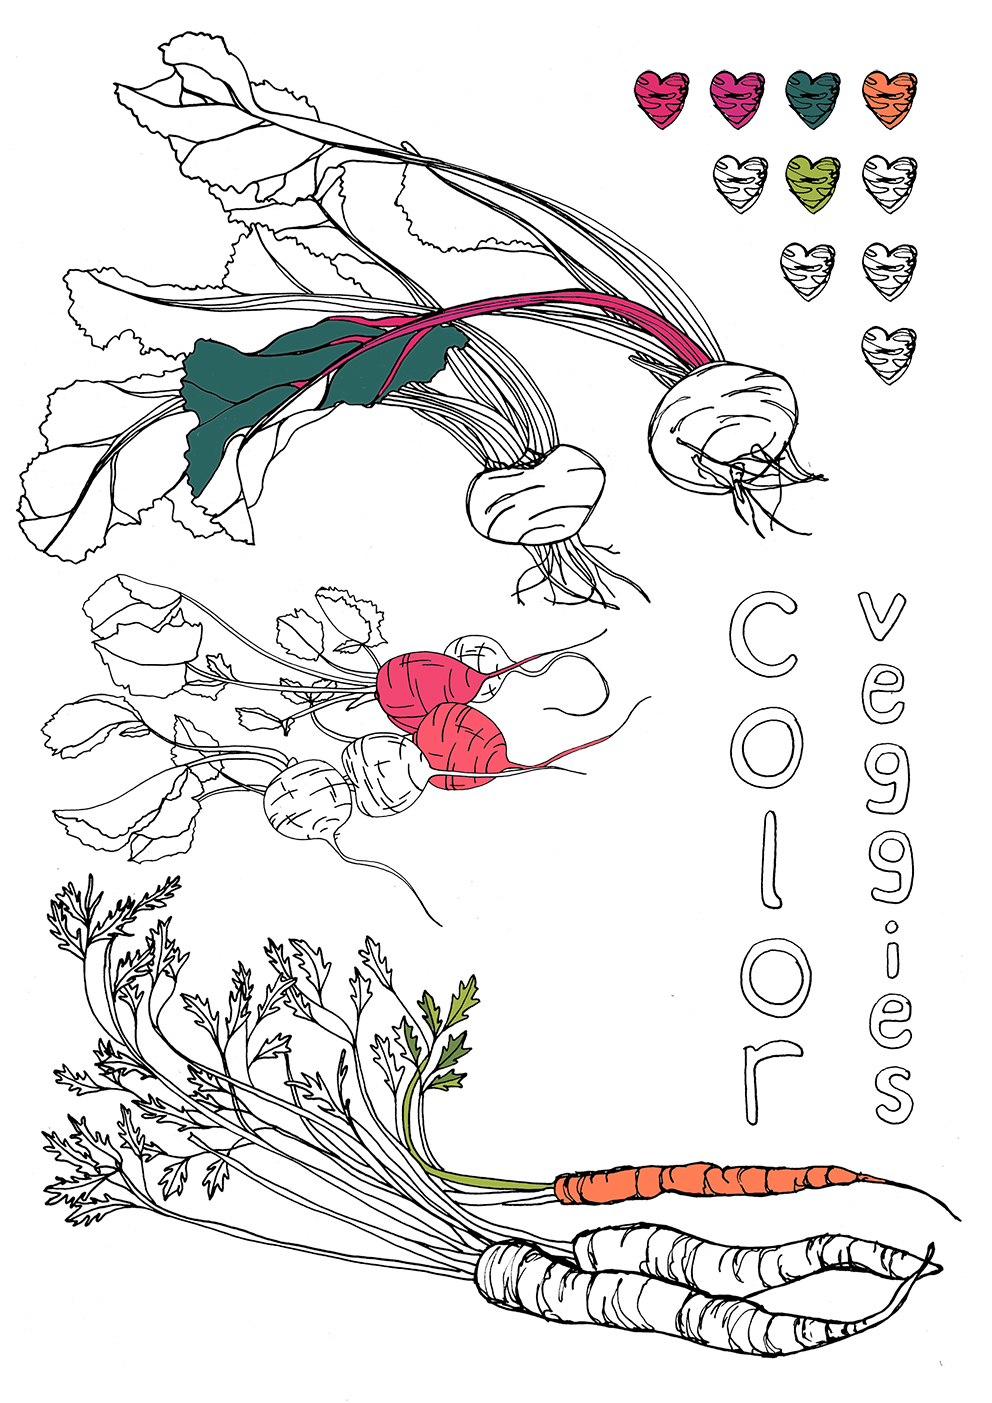 ColoringPage COLOURING colouringbook handdrawn details coloringbook wellbeing relaxing